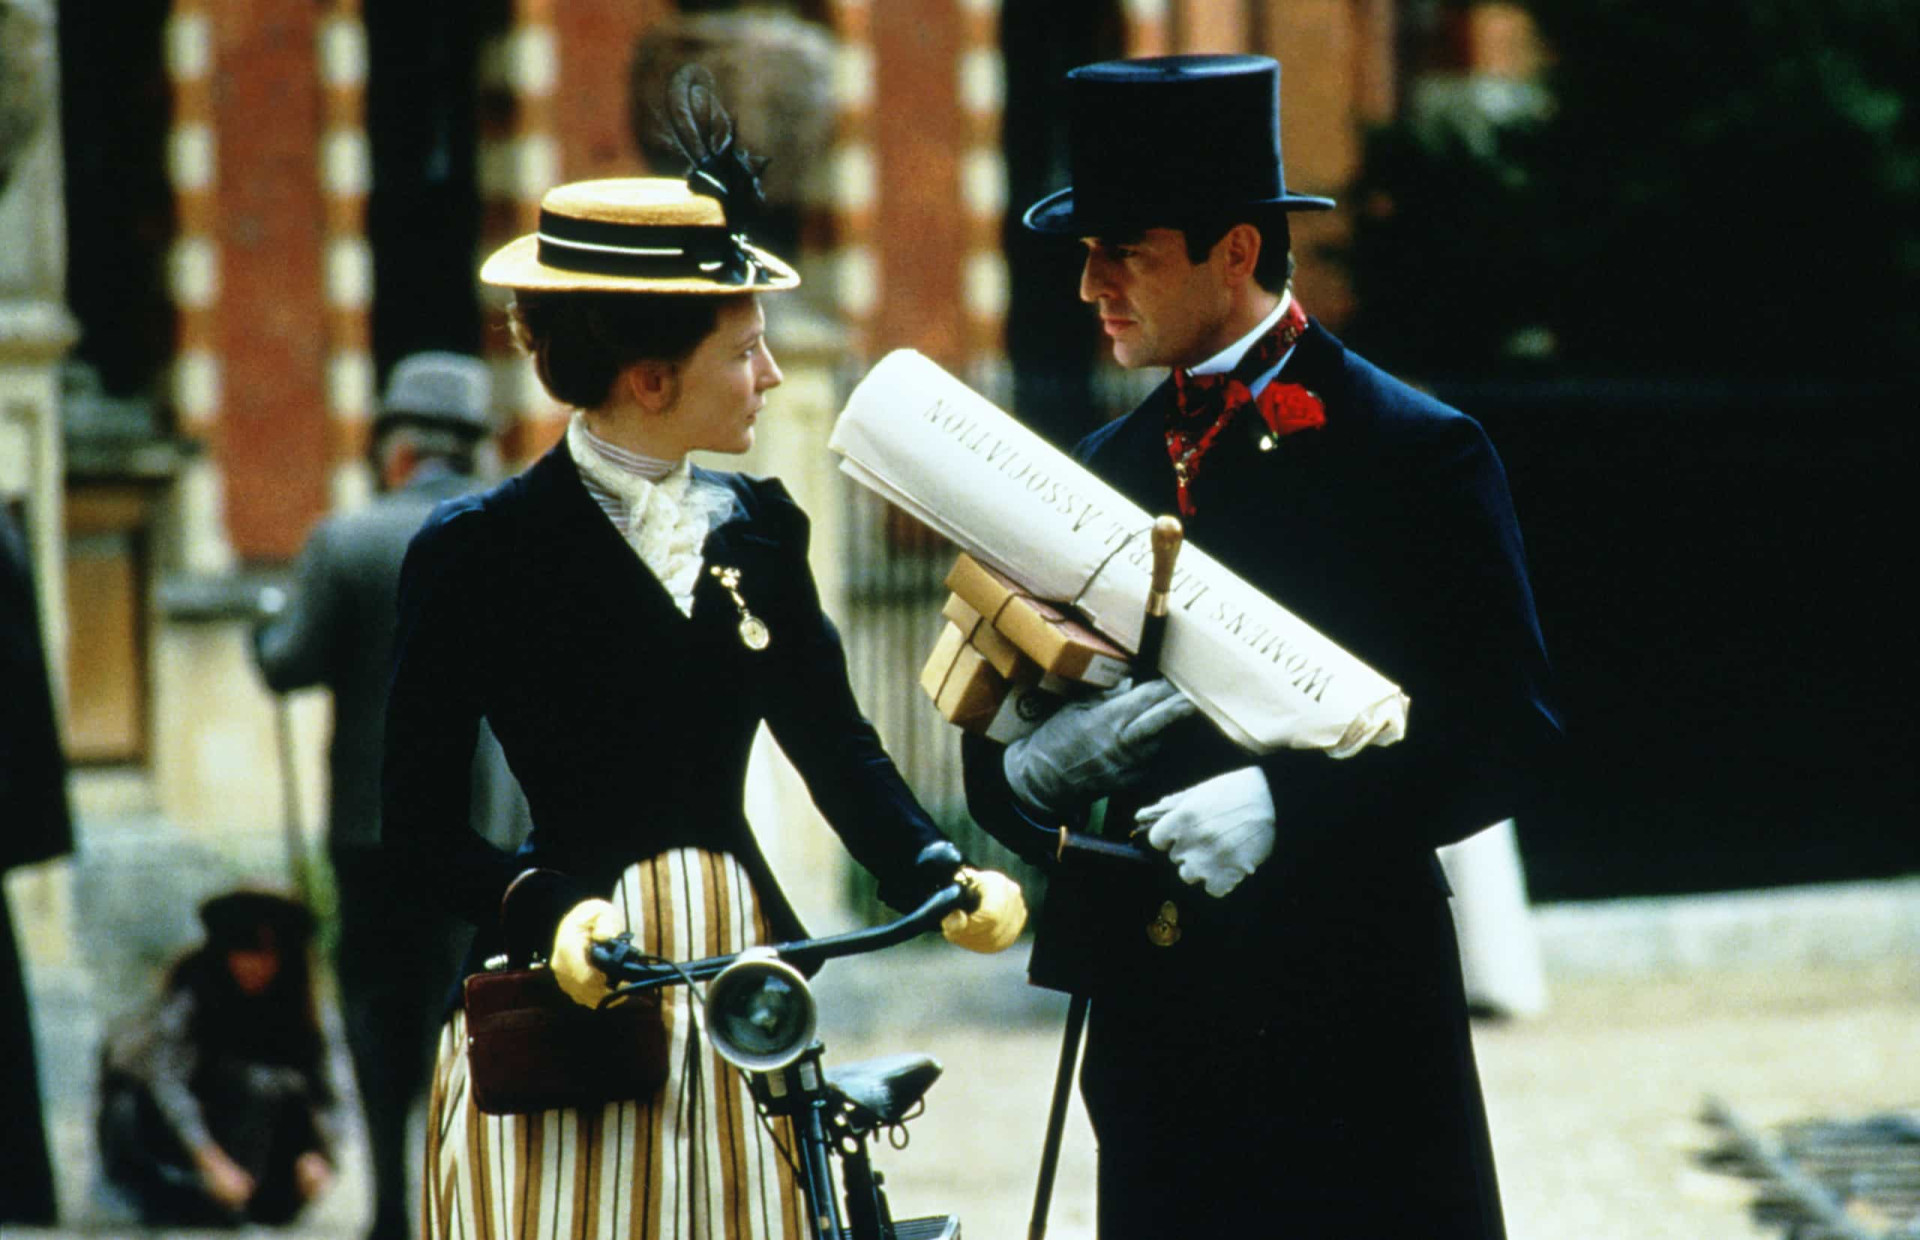 <p>While the plot of the 1999 film differs from the original Wilde play in a number of key respects, this screen adaption was nonetheless positively received by critics, and was selected as the 1999 Cannes Film Festival's closing film. Pictured is Cate Blanchett as Lady Gertrude and Rupert Everett as Lord Arthur Goring.</p><p><a href="https://www.msn.com/en-us/community/channel/vid-7xx8mnucu55yw63we9va2gwr7uihbxwc68fxqp25x6tg4ftibpra?cvid=94631541bc0f4f89bfd59158d696ad7e">Follow us and access great exclusive content every day</a></p>